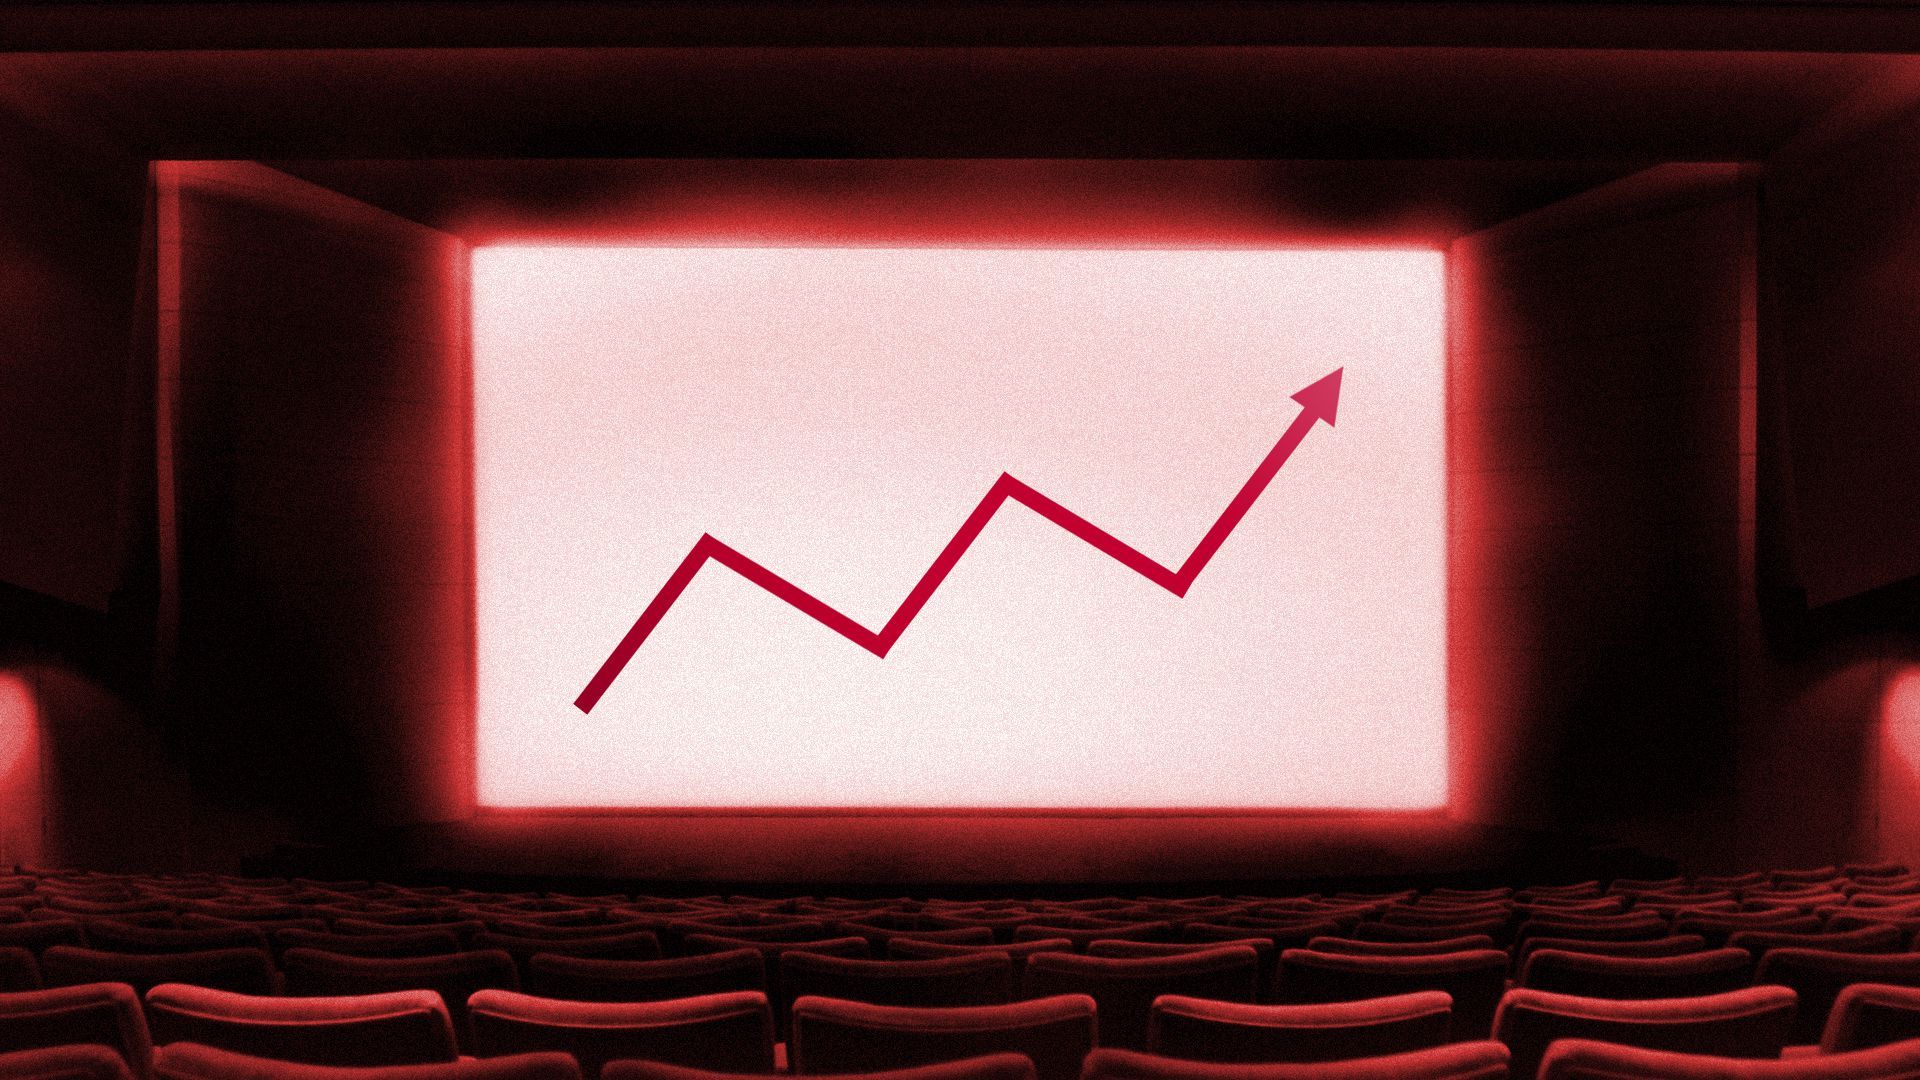 Illustration of a stock trend line on a movie theater screen